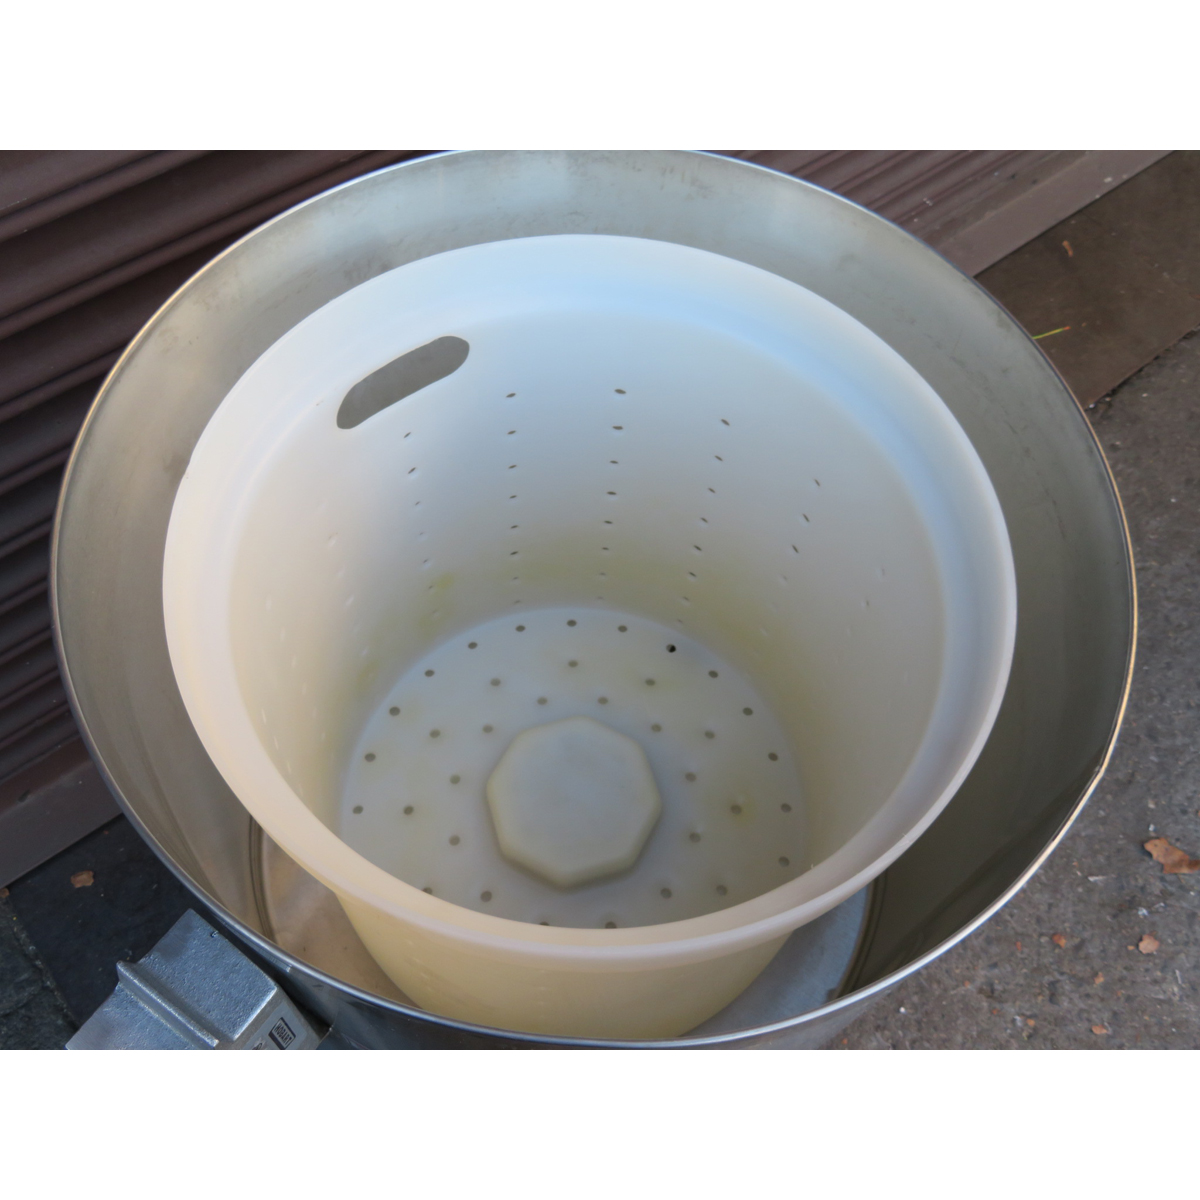 Hobart SDPS Salad Spinner / Dryer, Used Great Condition image 2